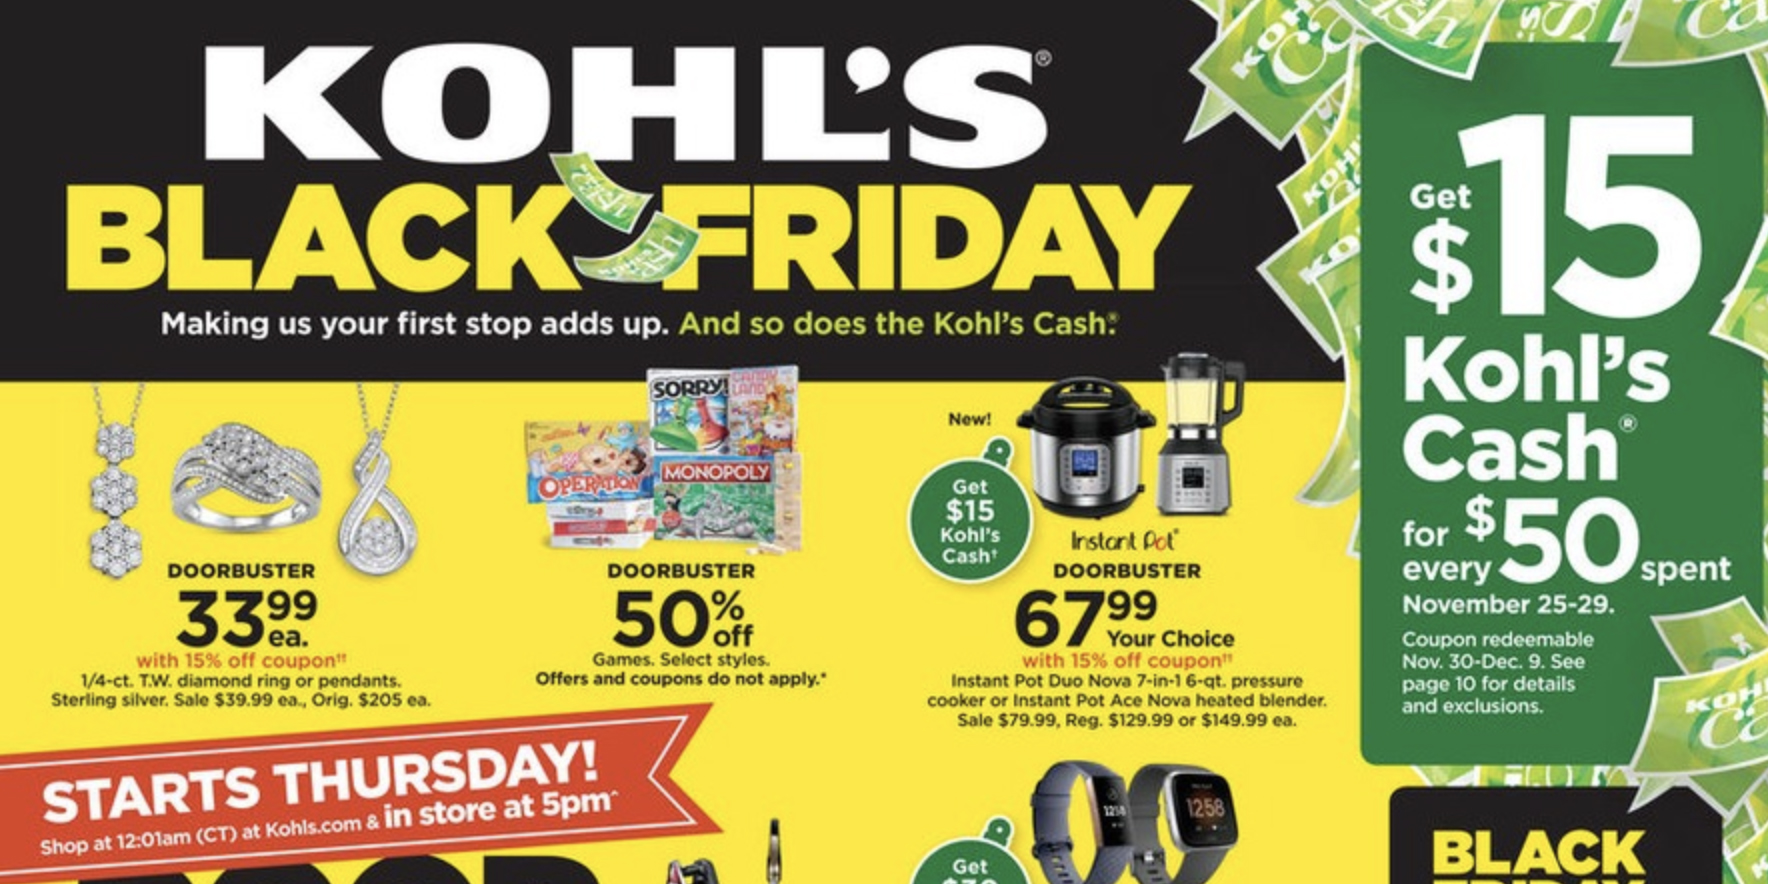 black friday ads 2019 fitbit